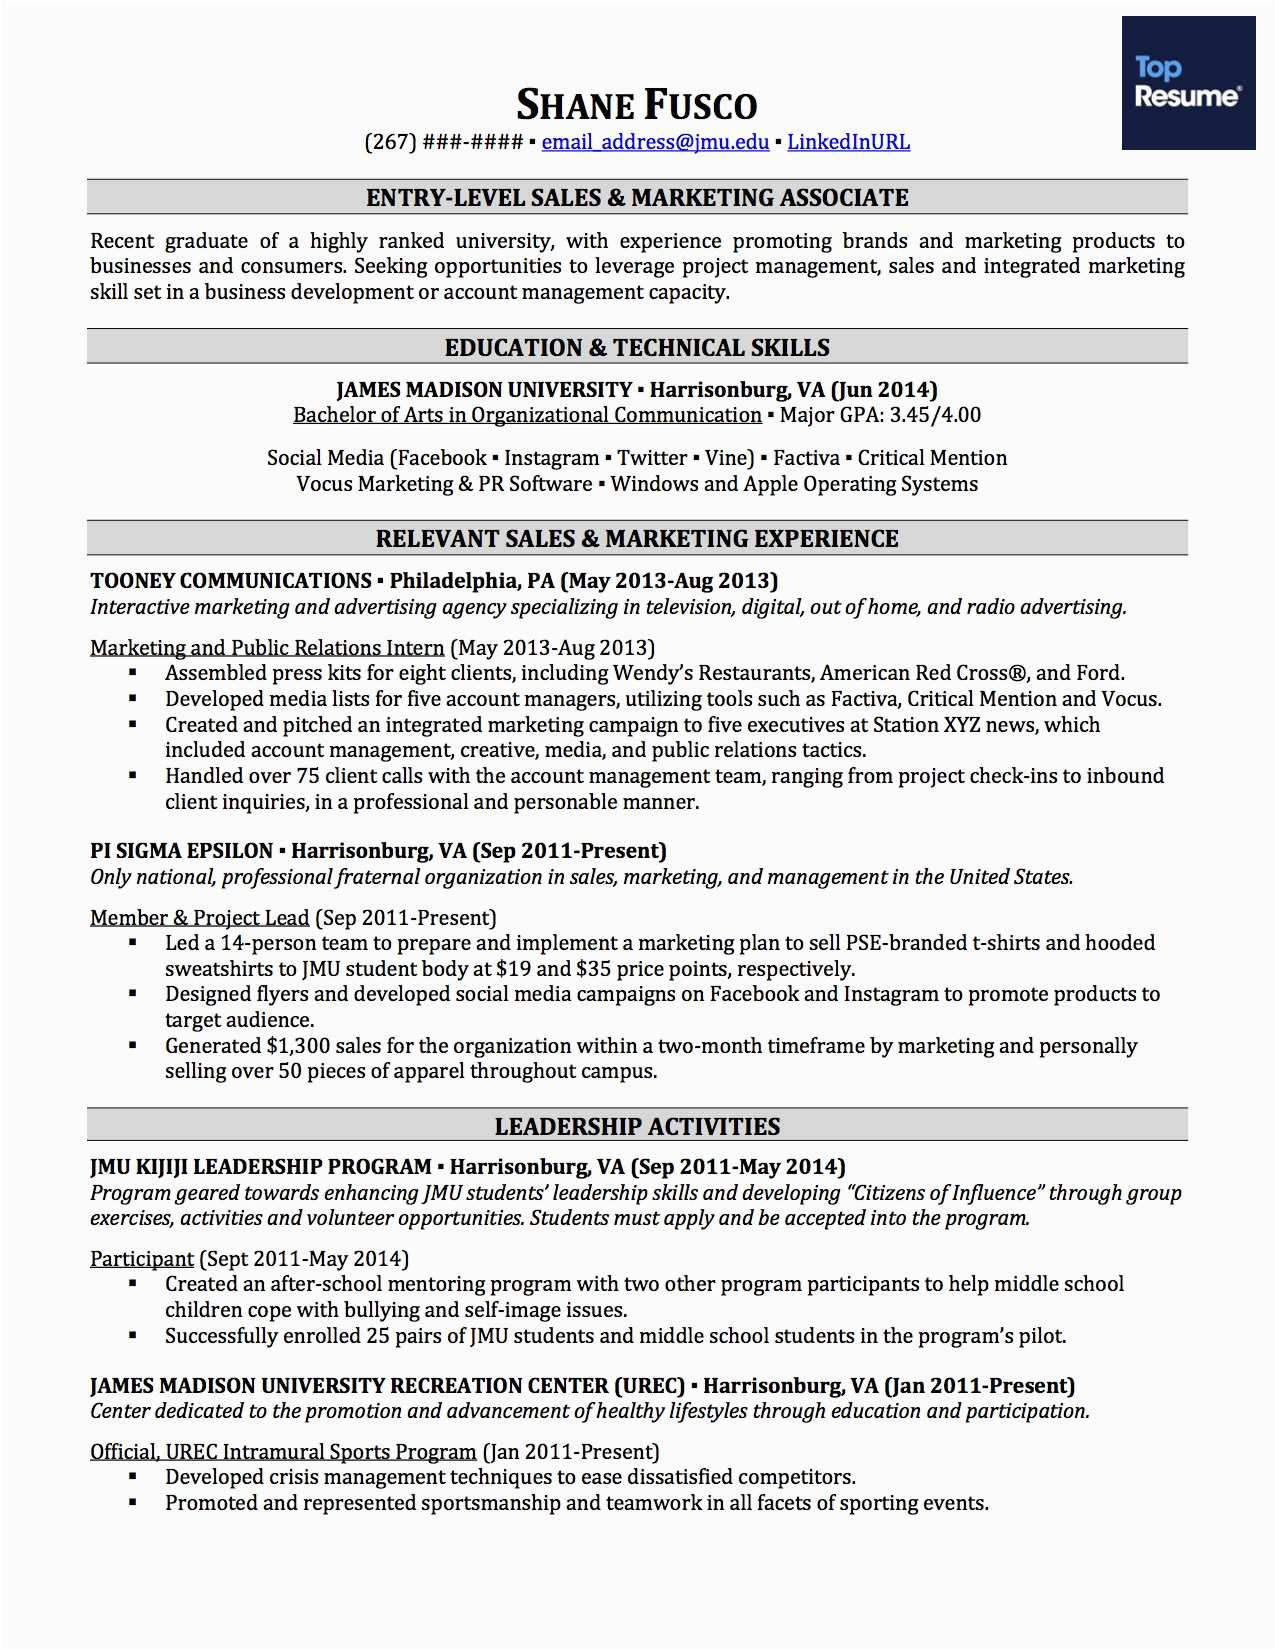 Resume Sample for someone with No Work Experience How to Write A Resume with No Job Experience